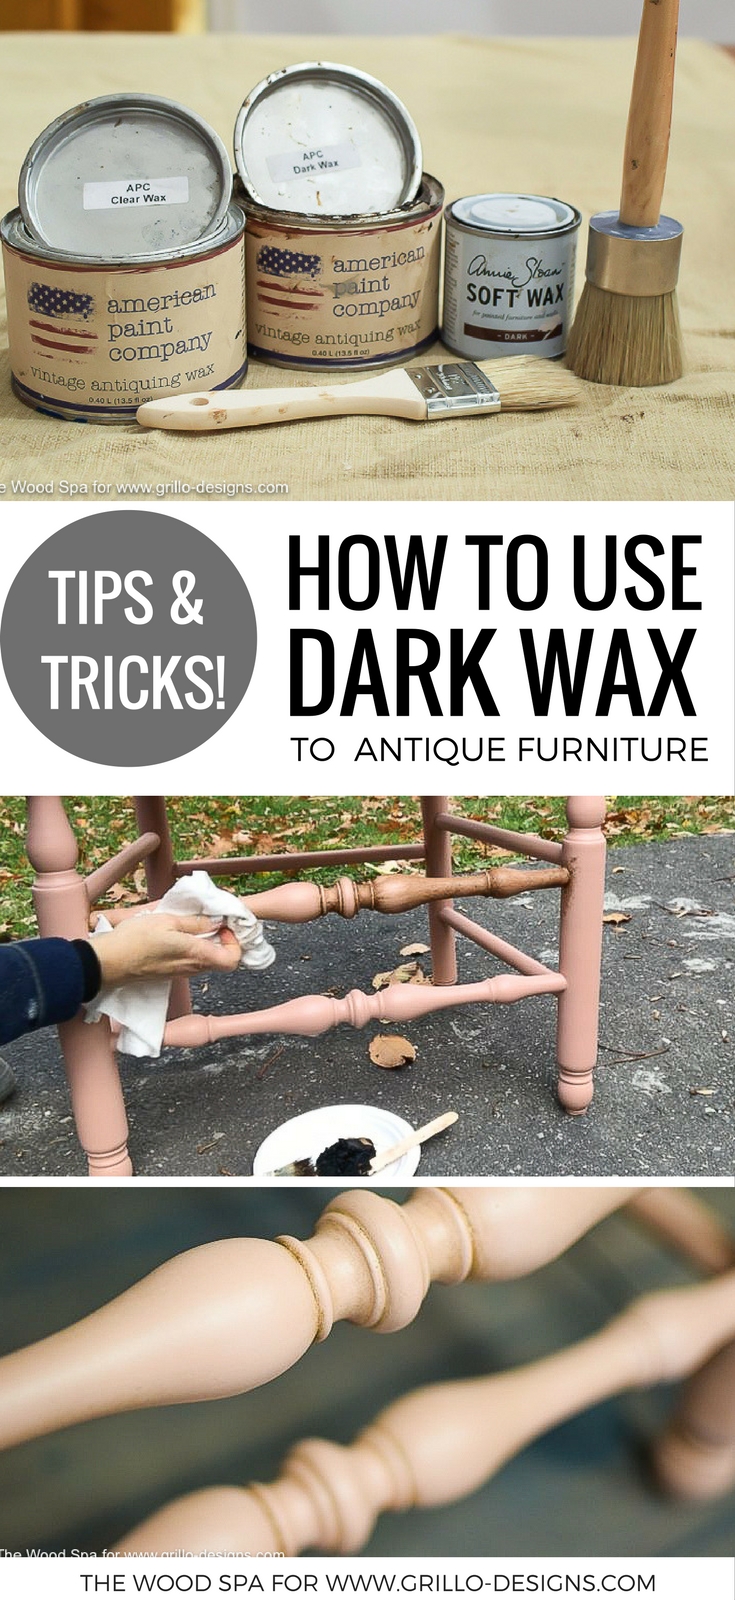 How To Use Dark Wax To Antique Furniture • Grillo Designs